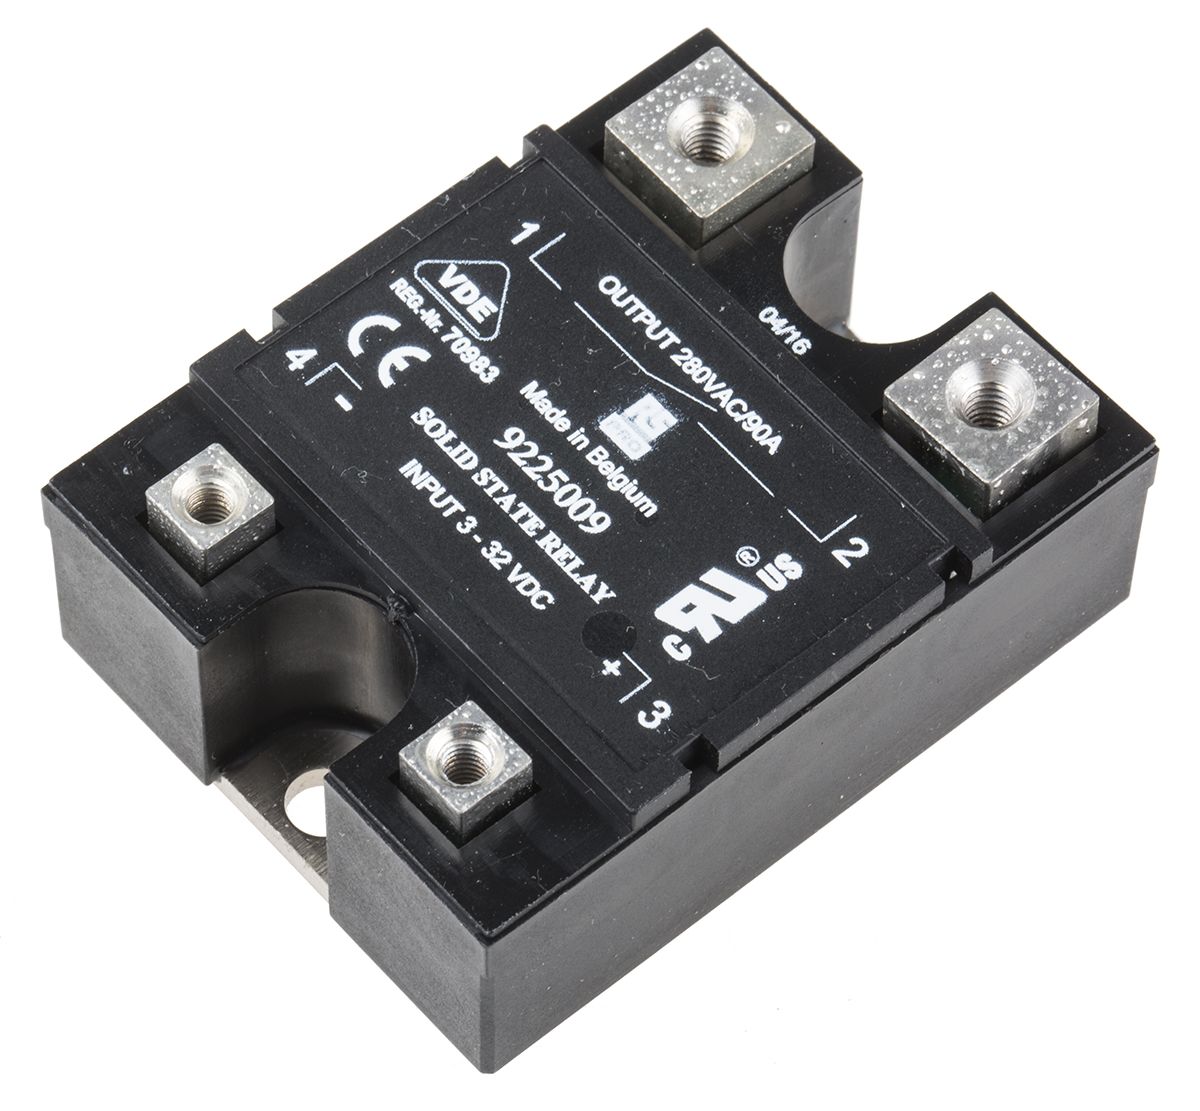 RS PRO Panel Mount Solid State Relay, 90 A rms Max. Load, 280 V ac Max. Load, 32 V dc Max. Control